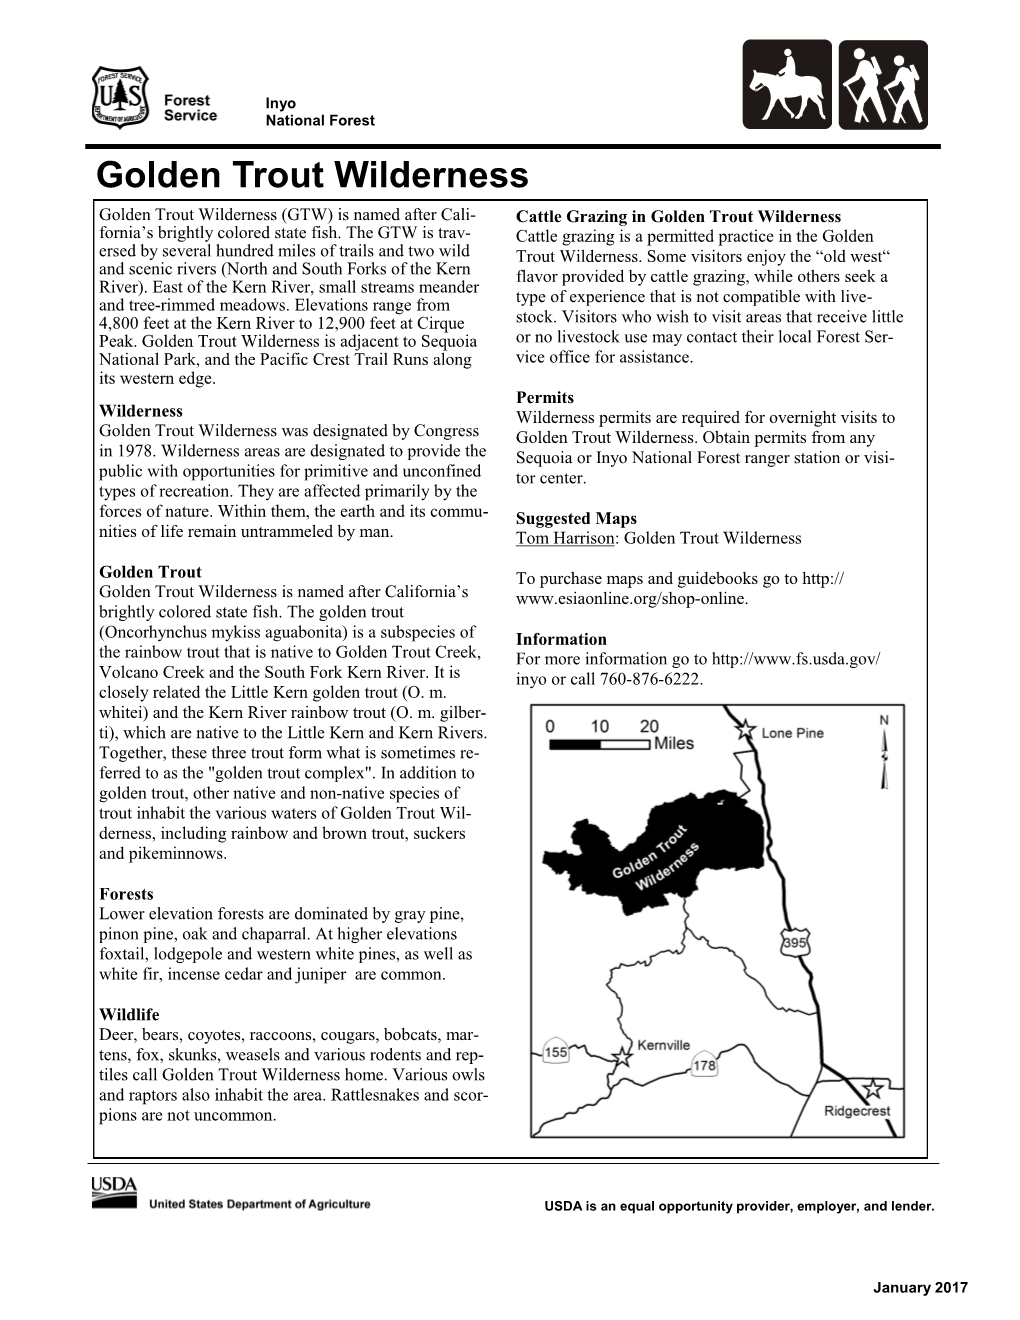 Golden Trout Wilderness Golden Trout Wilderness (GTW) Is Named After Cali- Cattle Grazing in Golden Trout Wilderness Fornia’S Brightly Colored State Fish